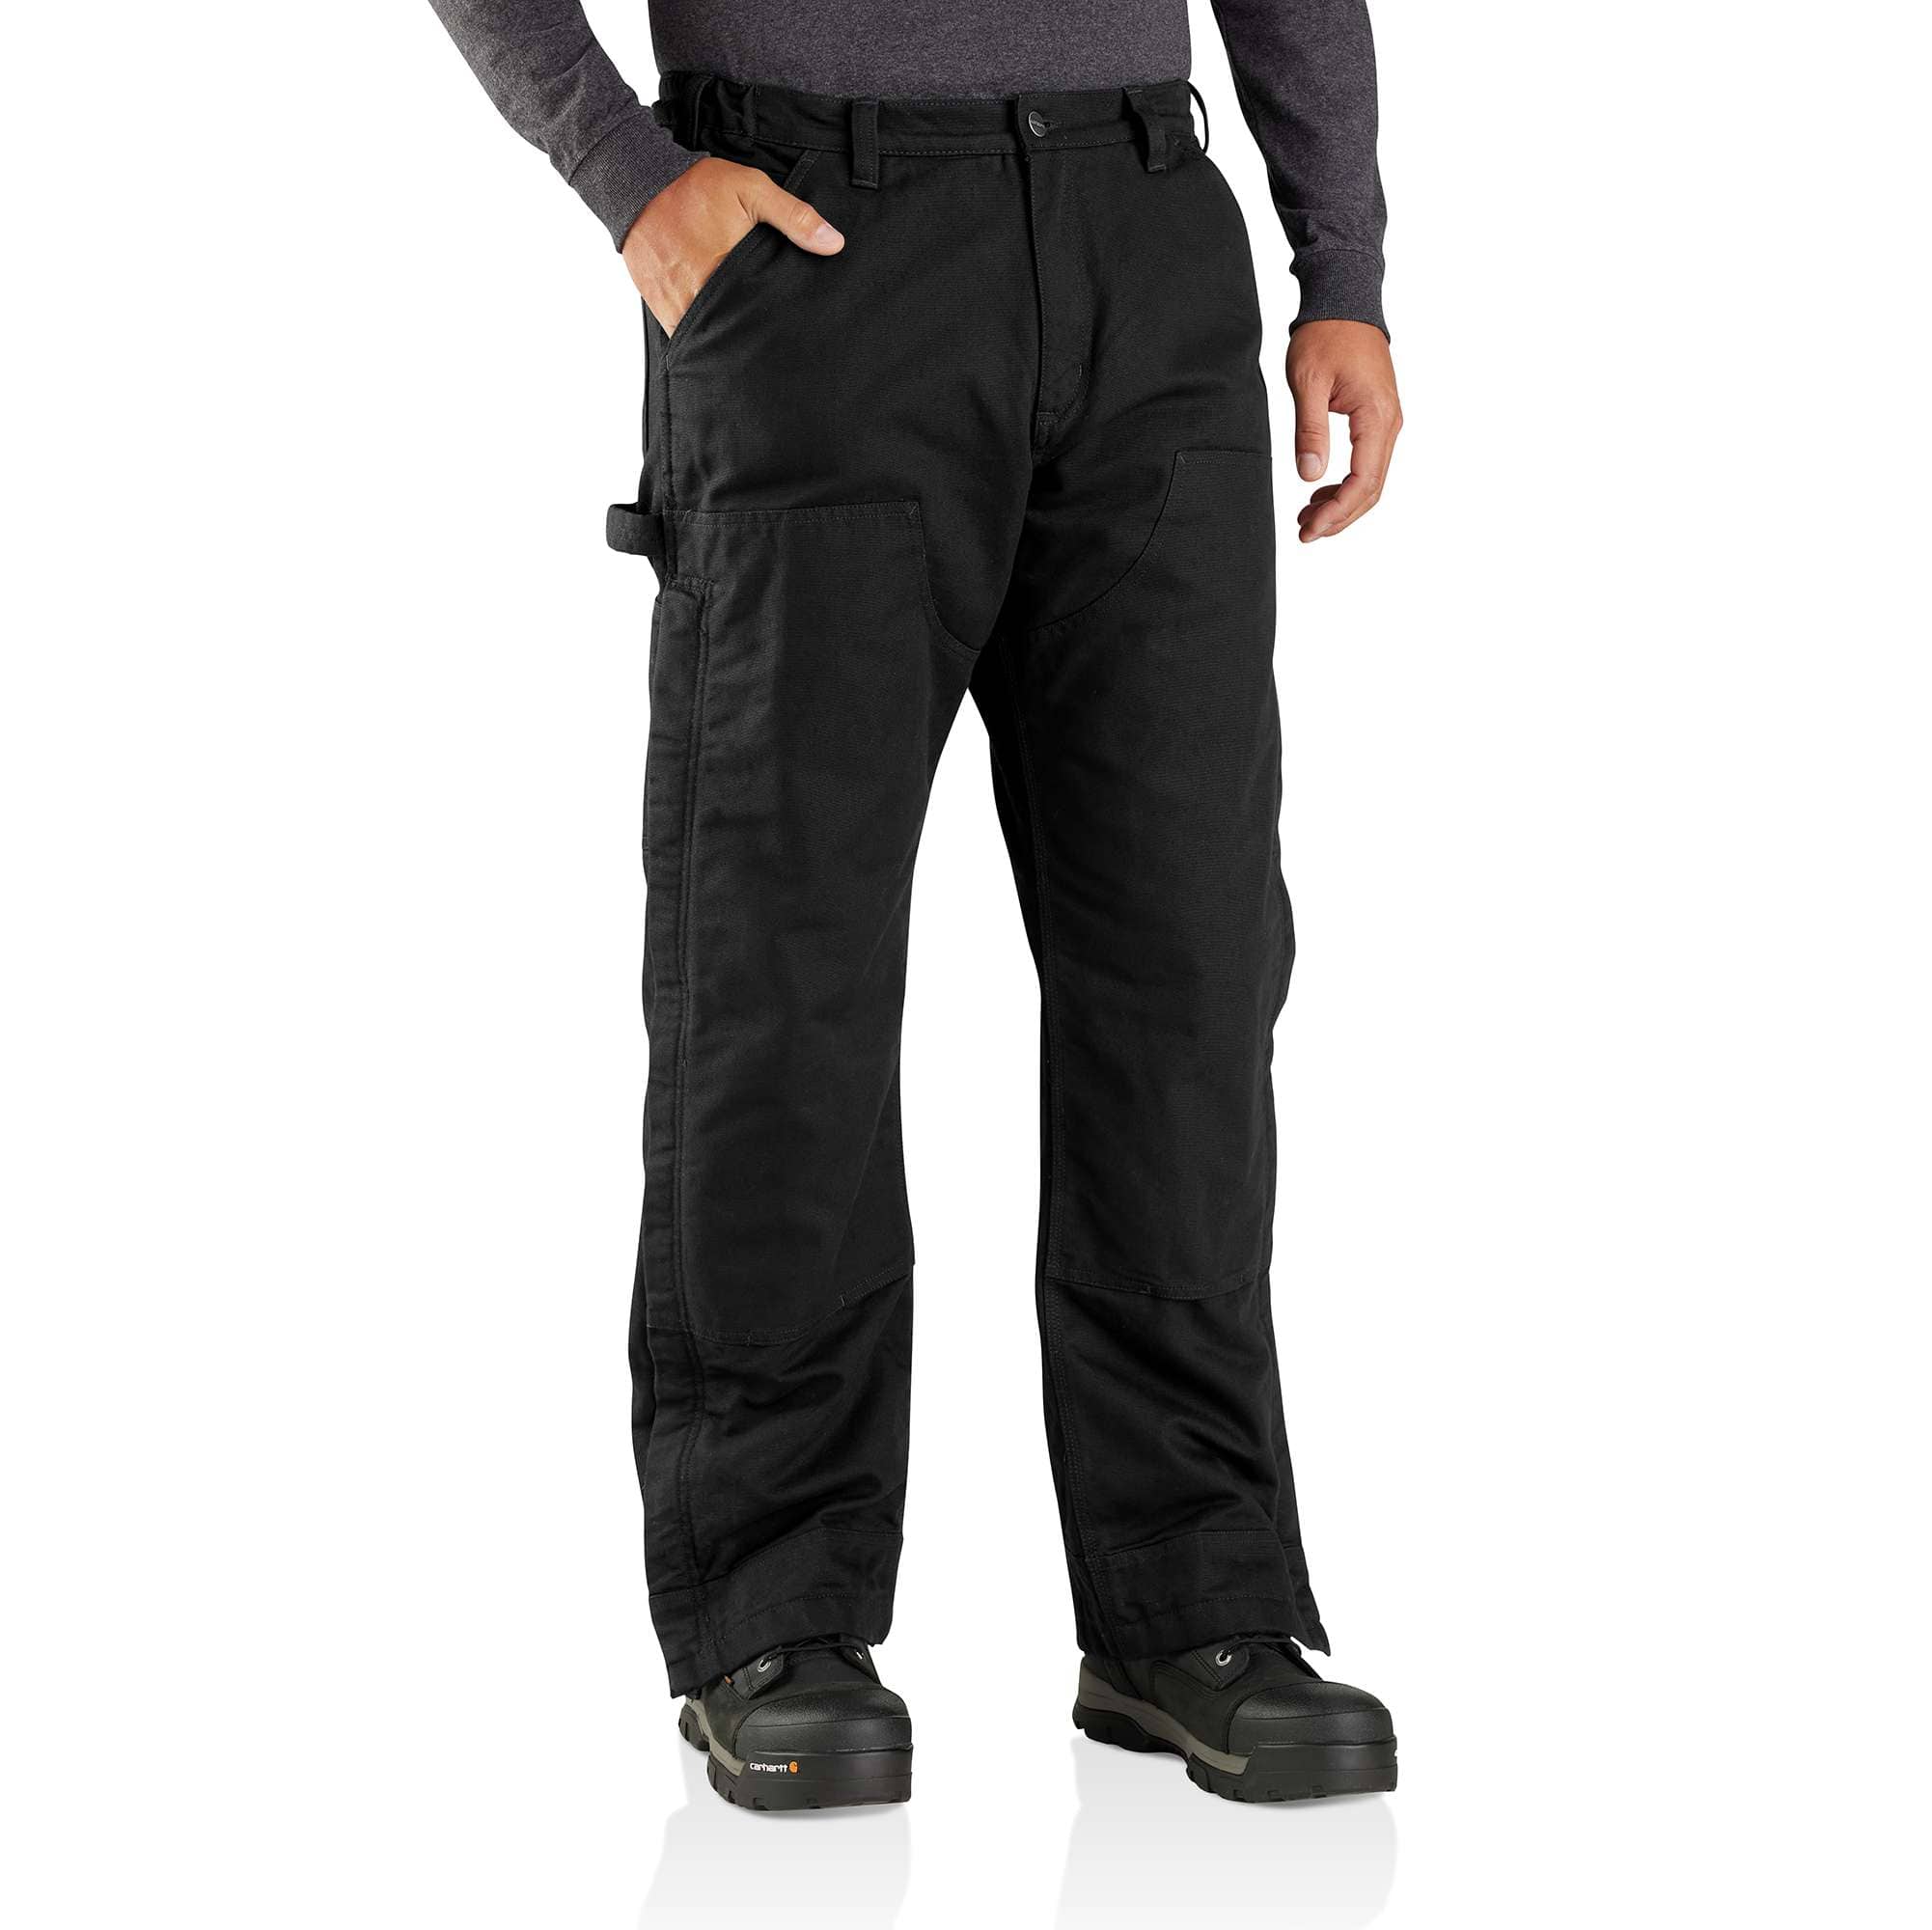 Loose Fit Washed Duck Insulated Pant - 4 Extreme Warmth Rating